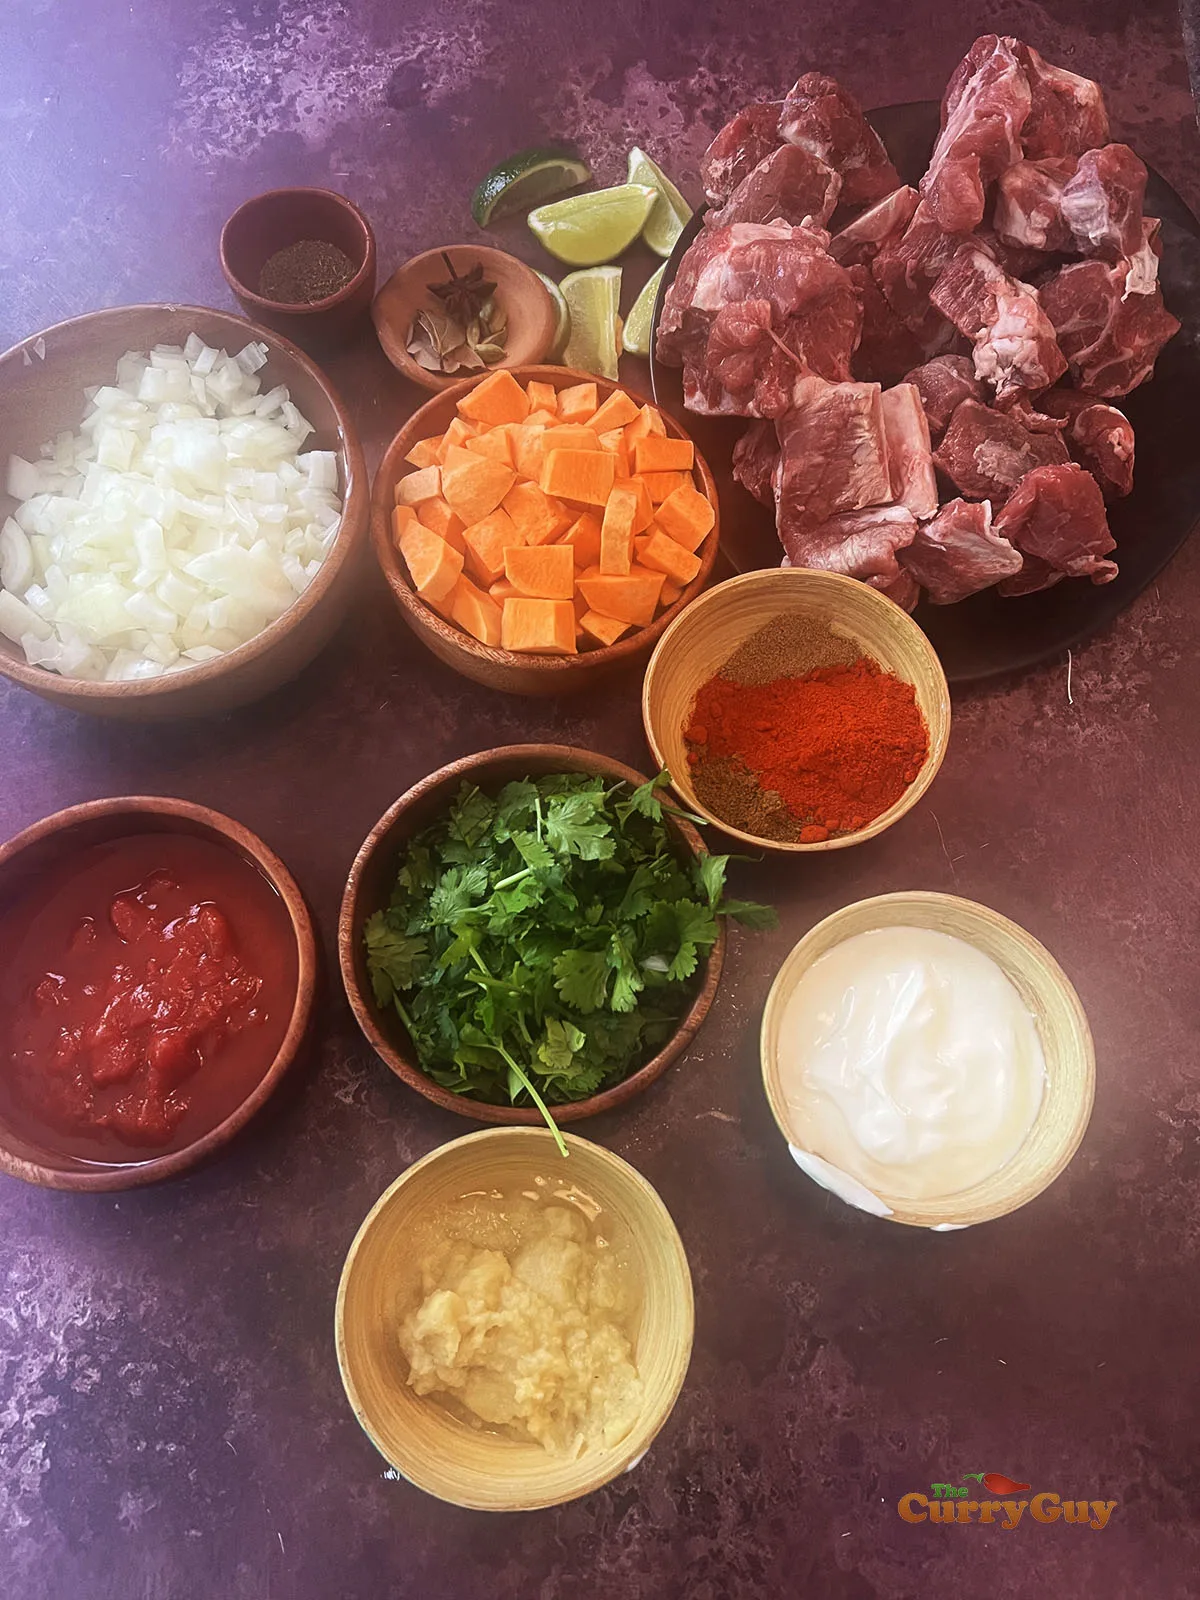 Ingredients for lamb and sweet potato curry